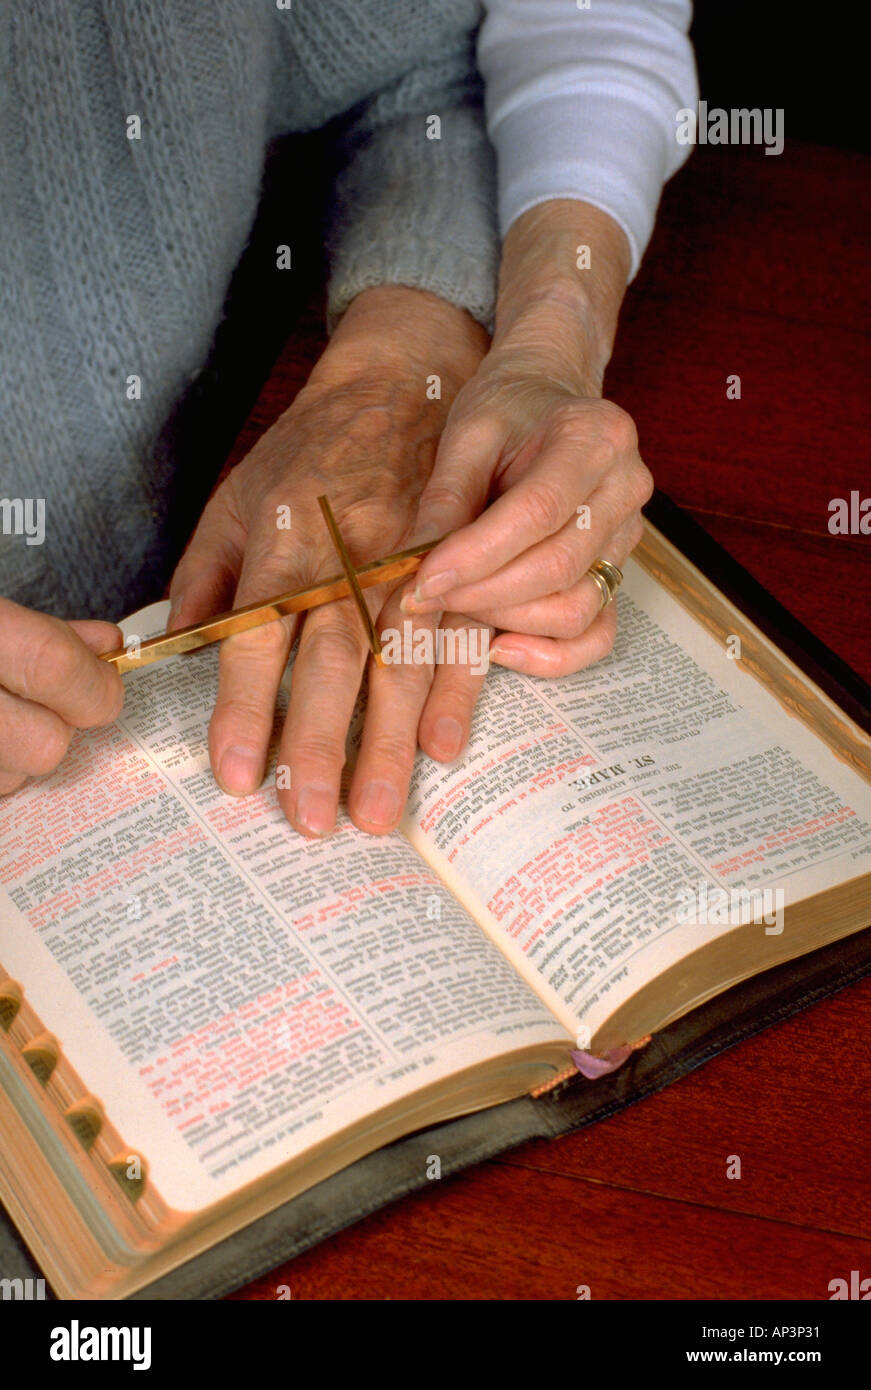 Hands of spouses age 88 and 75 with cross reading the bible. Minneapolis Minnesota MN USA Stock Photo